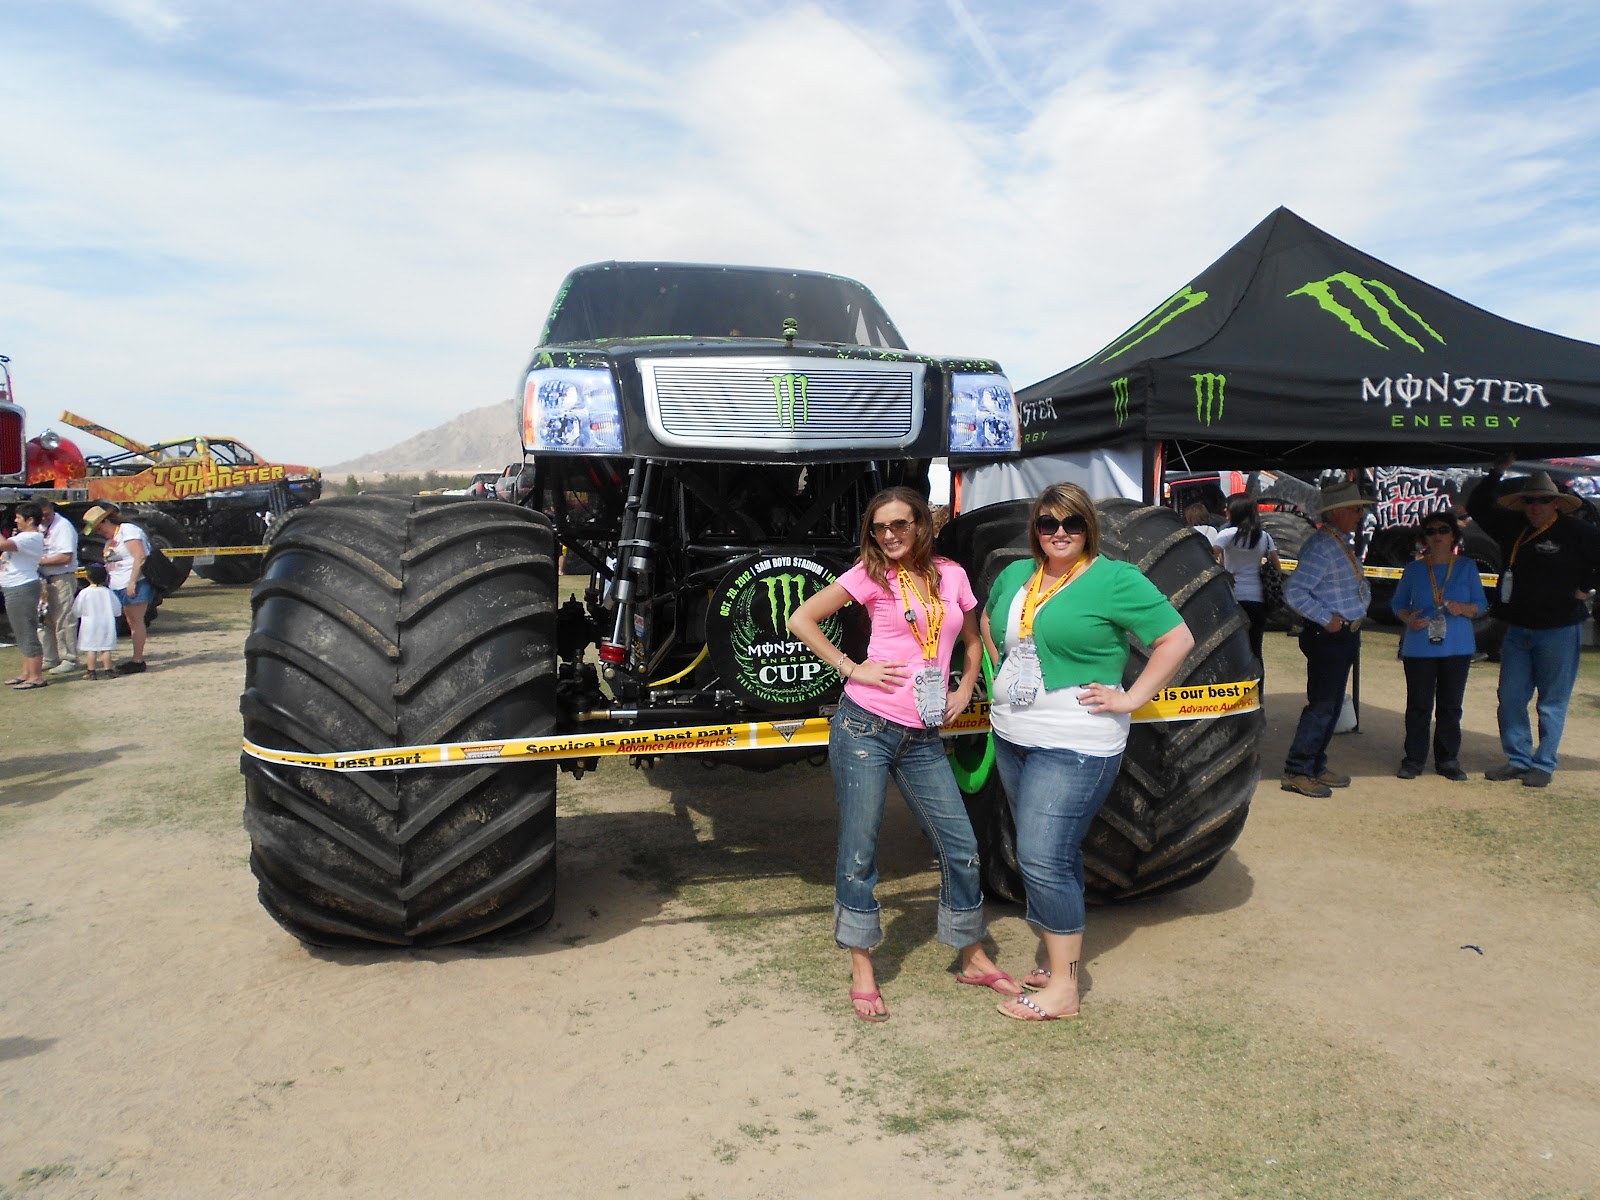  standing in front of the Monster Energy Monster Truck. Our favorite